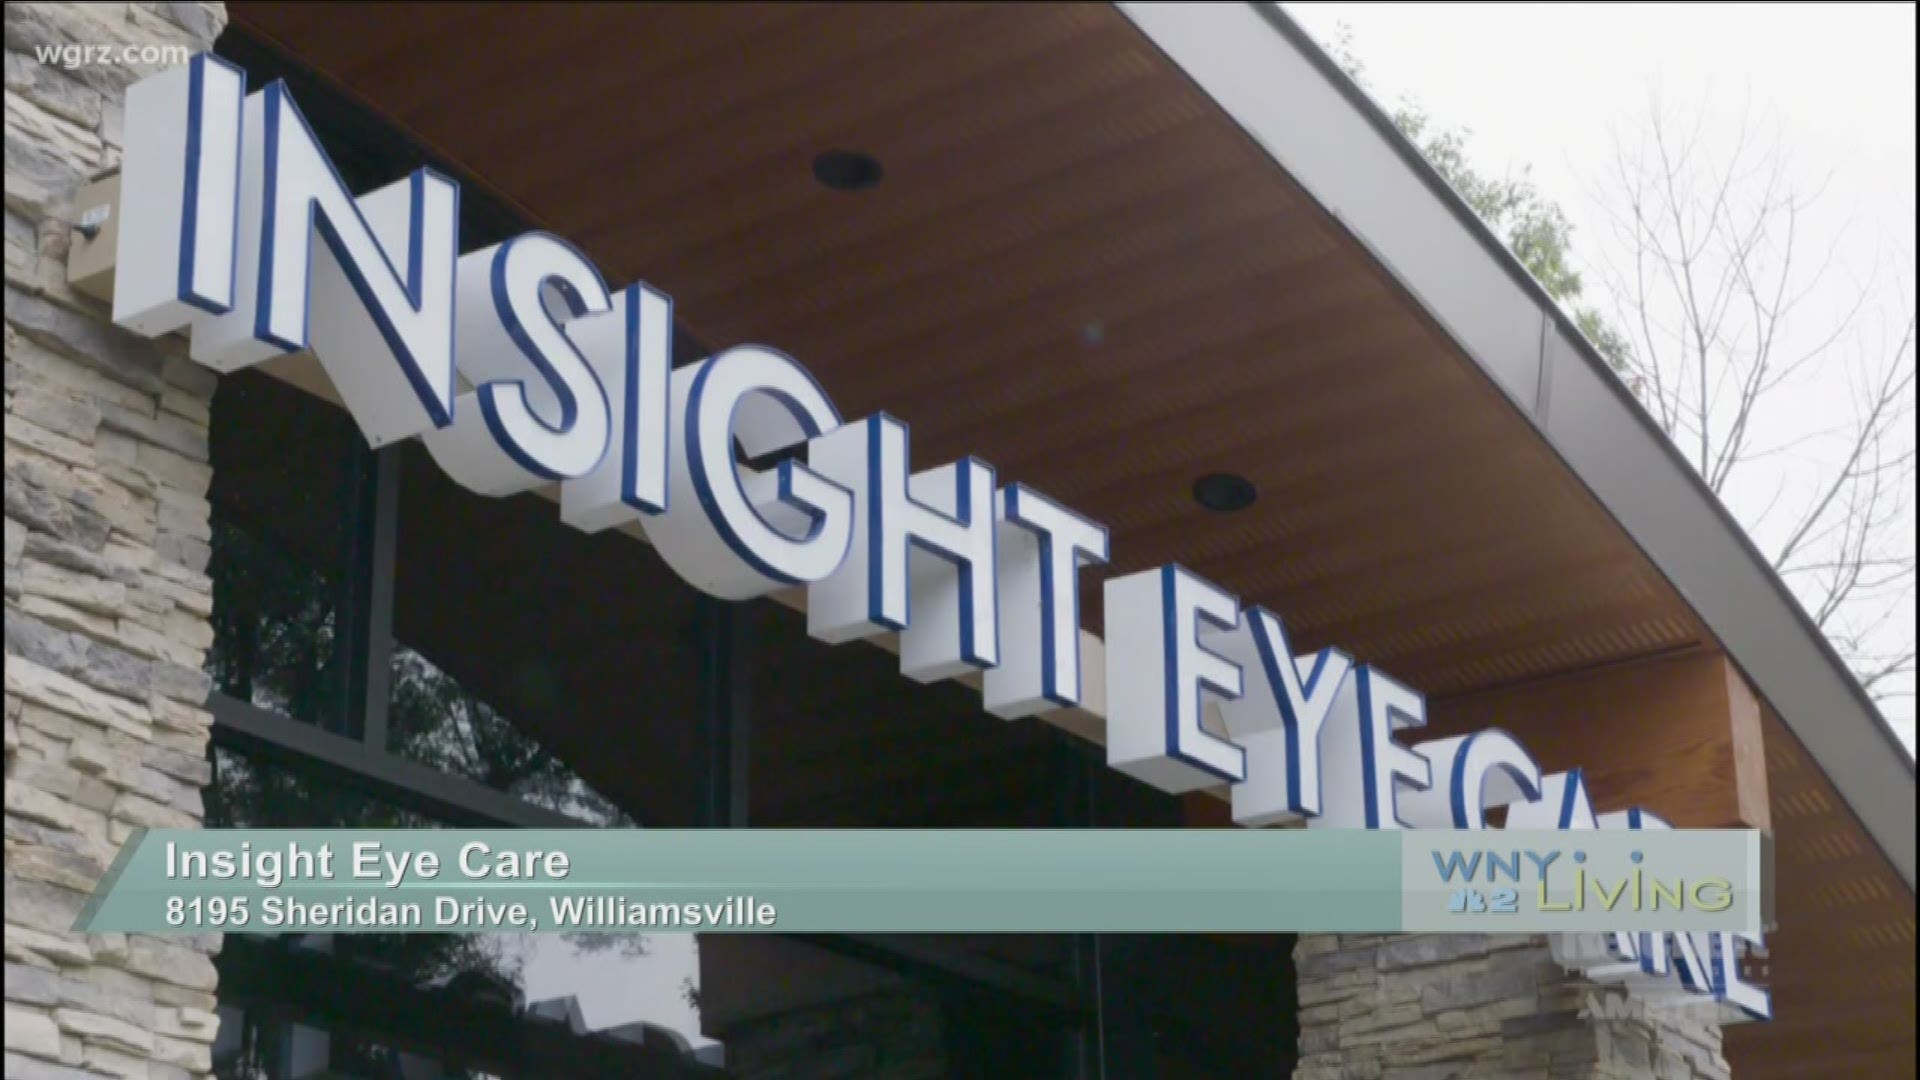 October 19 - Insight Eye Care (THIS VIDEO IS SPONSORED BY INSIGHT EYE CARE)